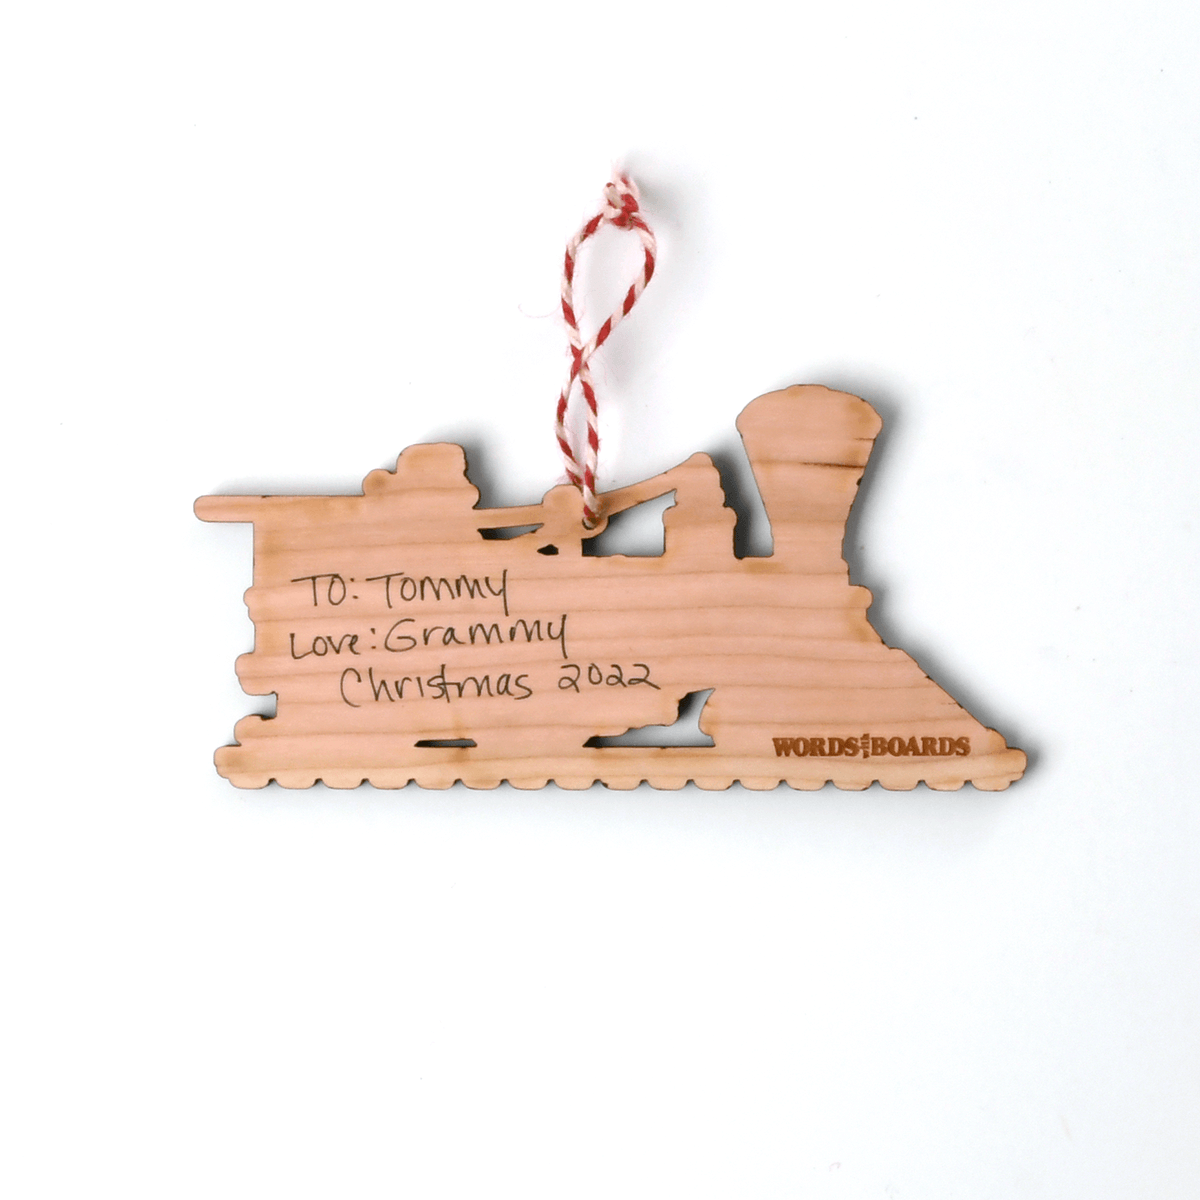 Train ornament in 2 woods, maple, cherry and walnut